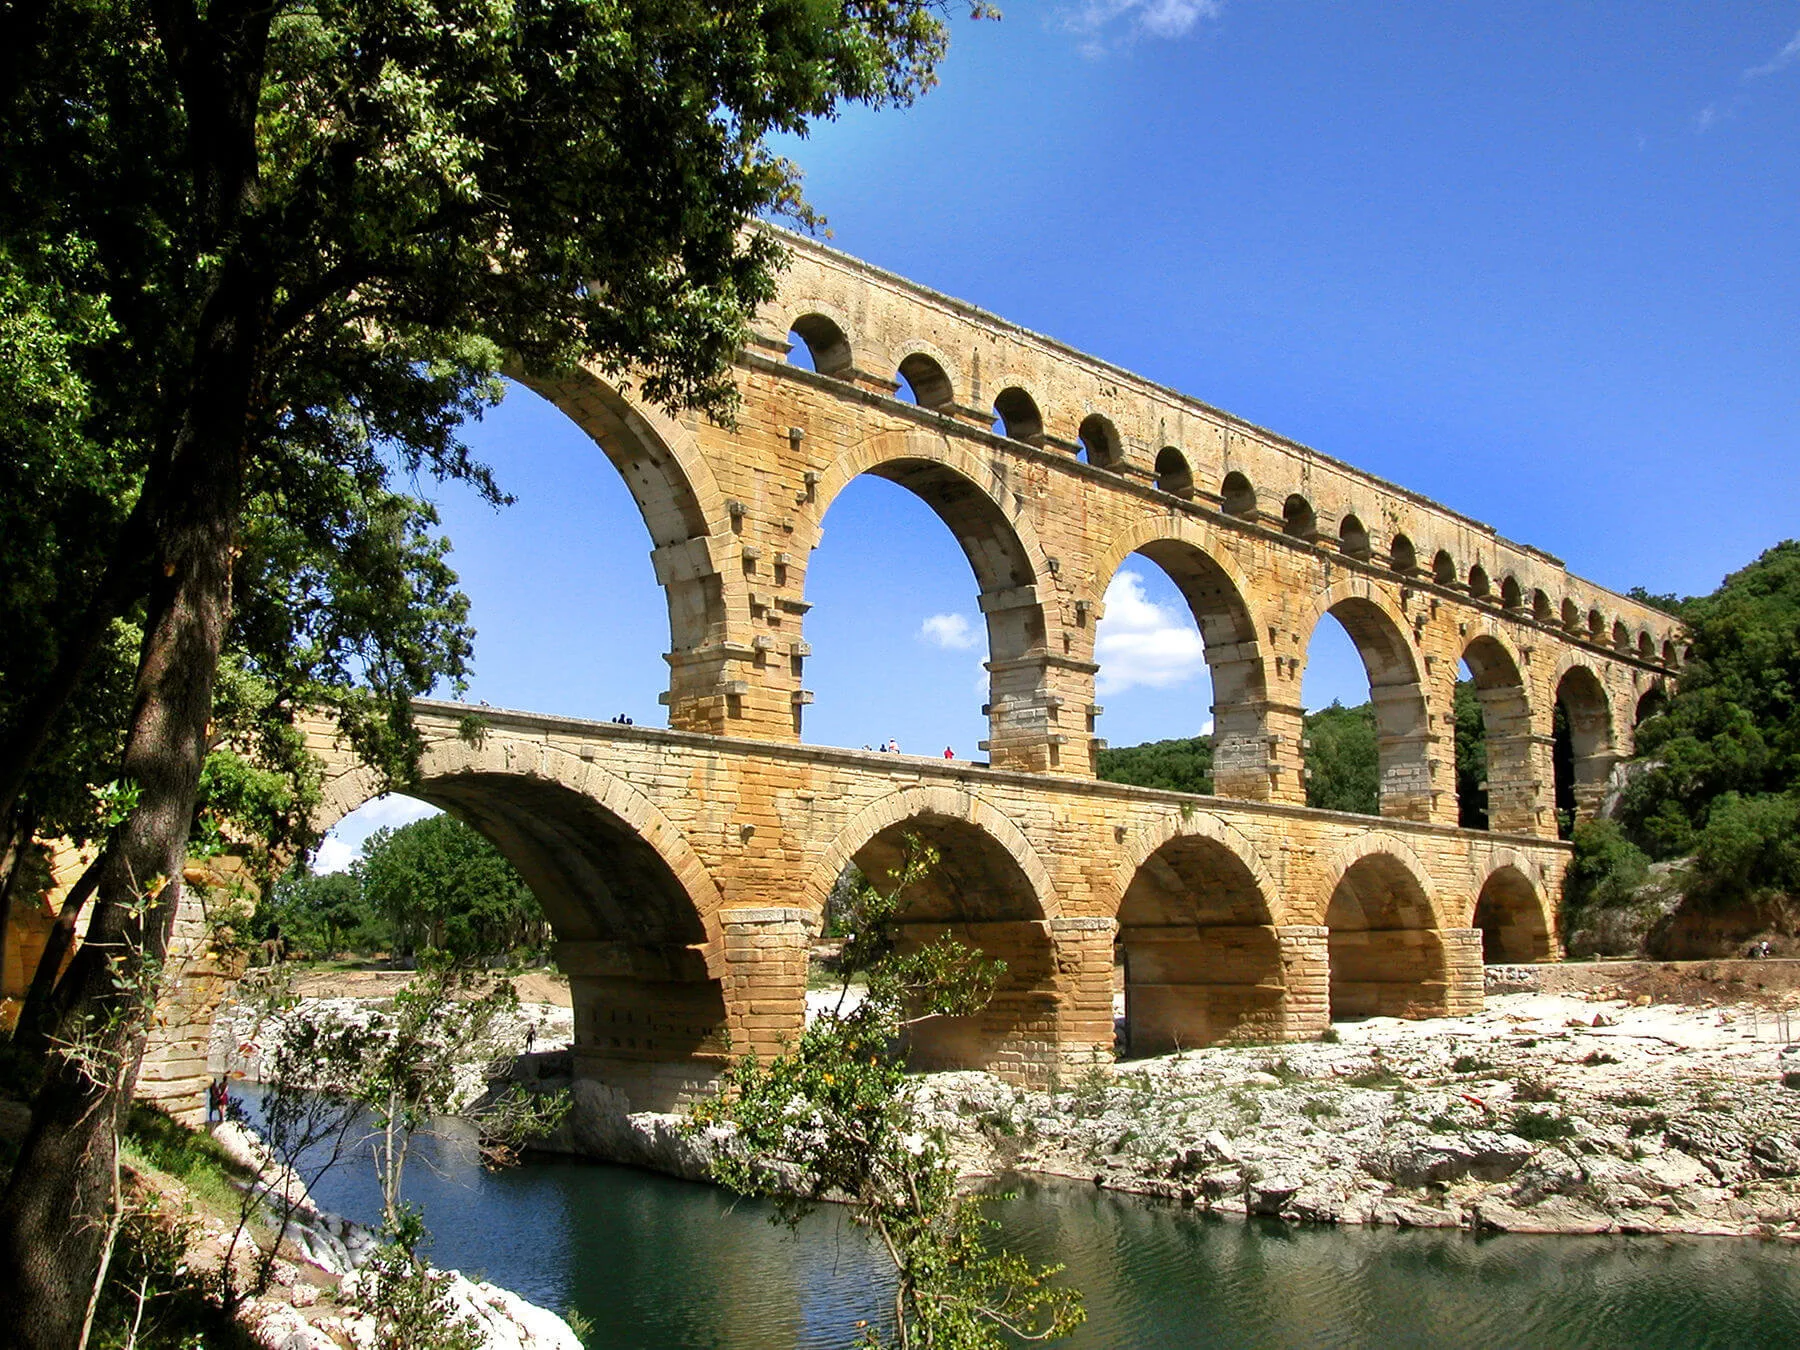 This is the most photogenic link of the Pont du Gard, the 30-mile-long aqueduct the ancient Romans built to bring water to their city of Nîmes